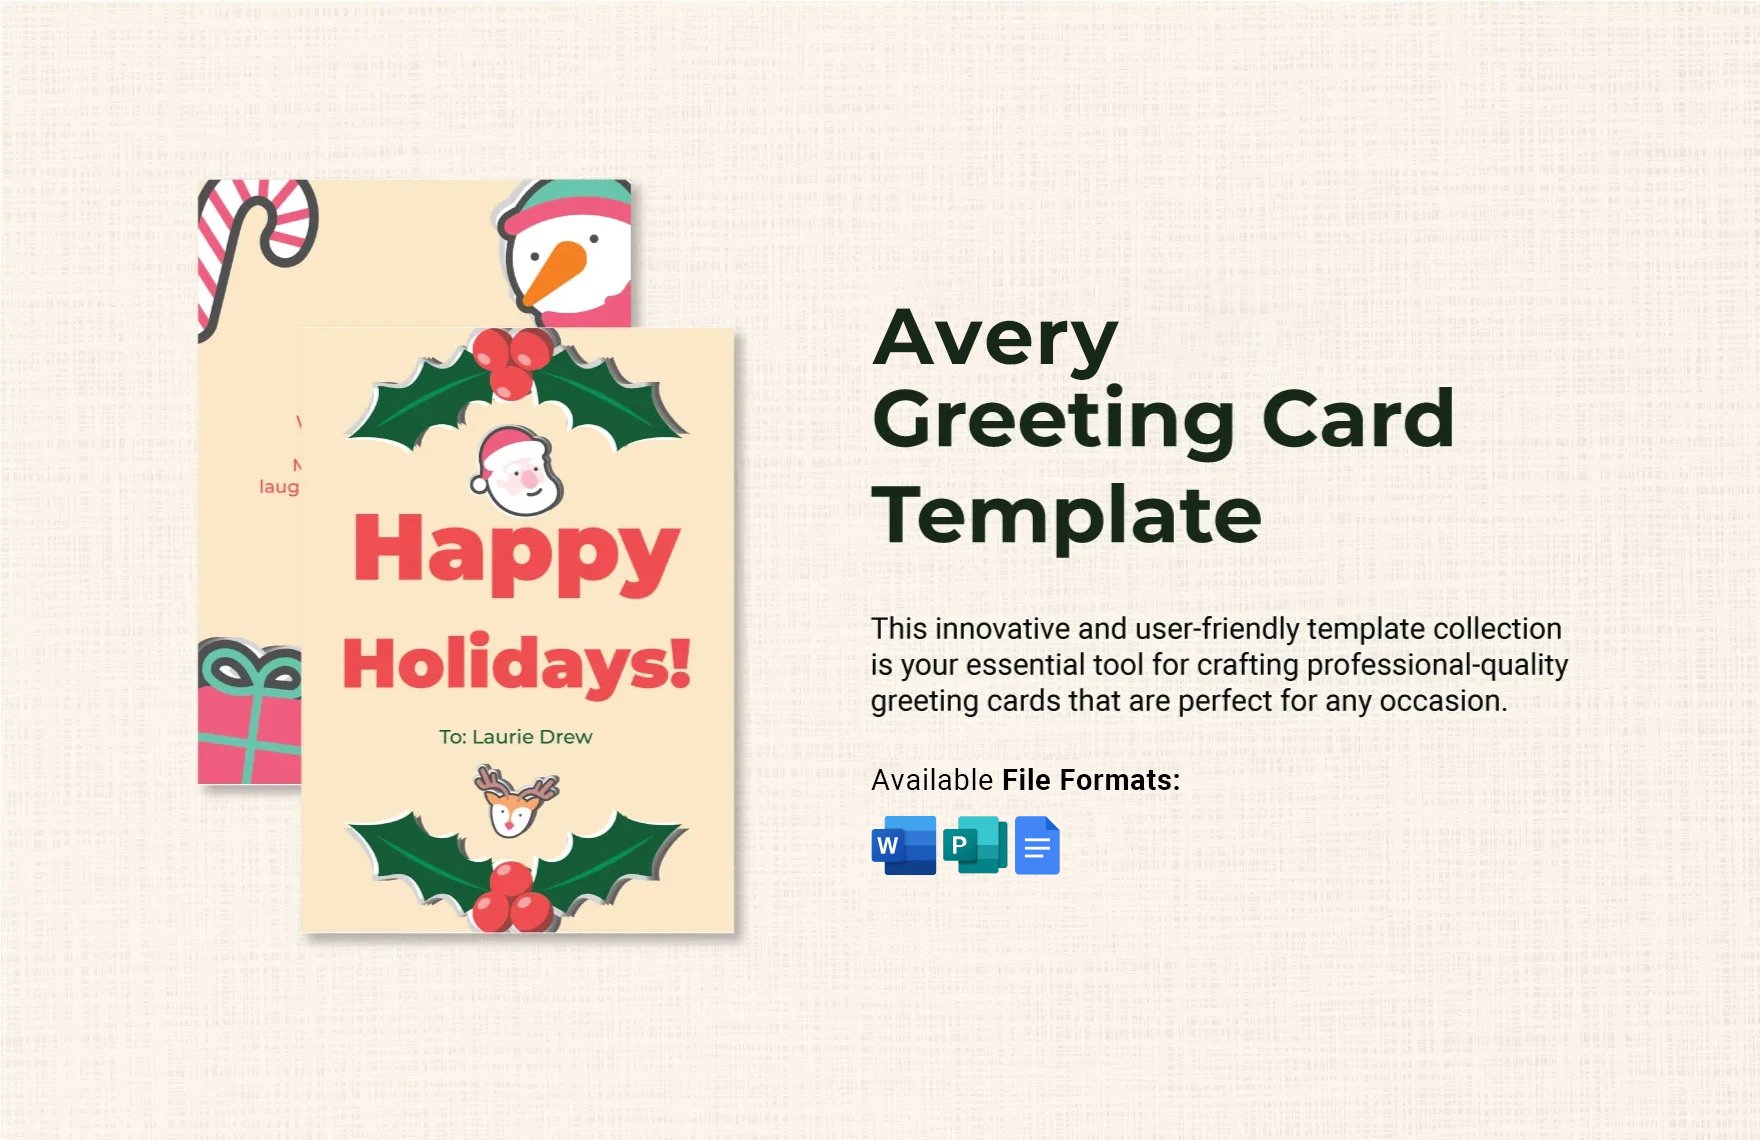 Avery Greeting Card Template